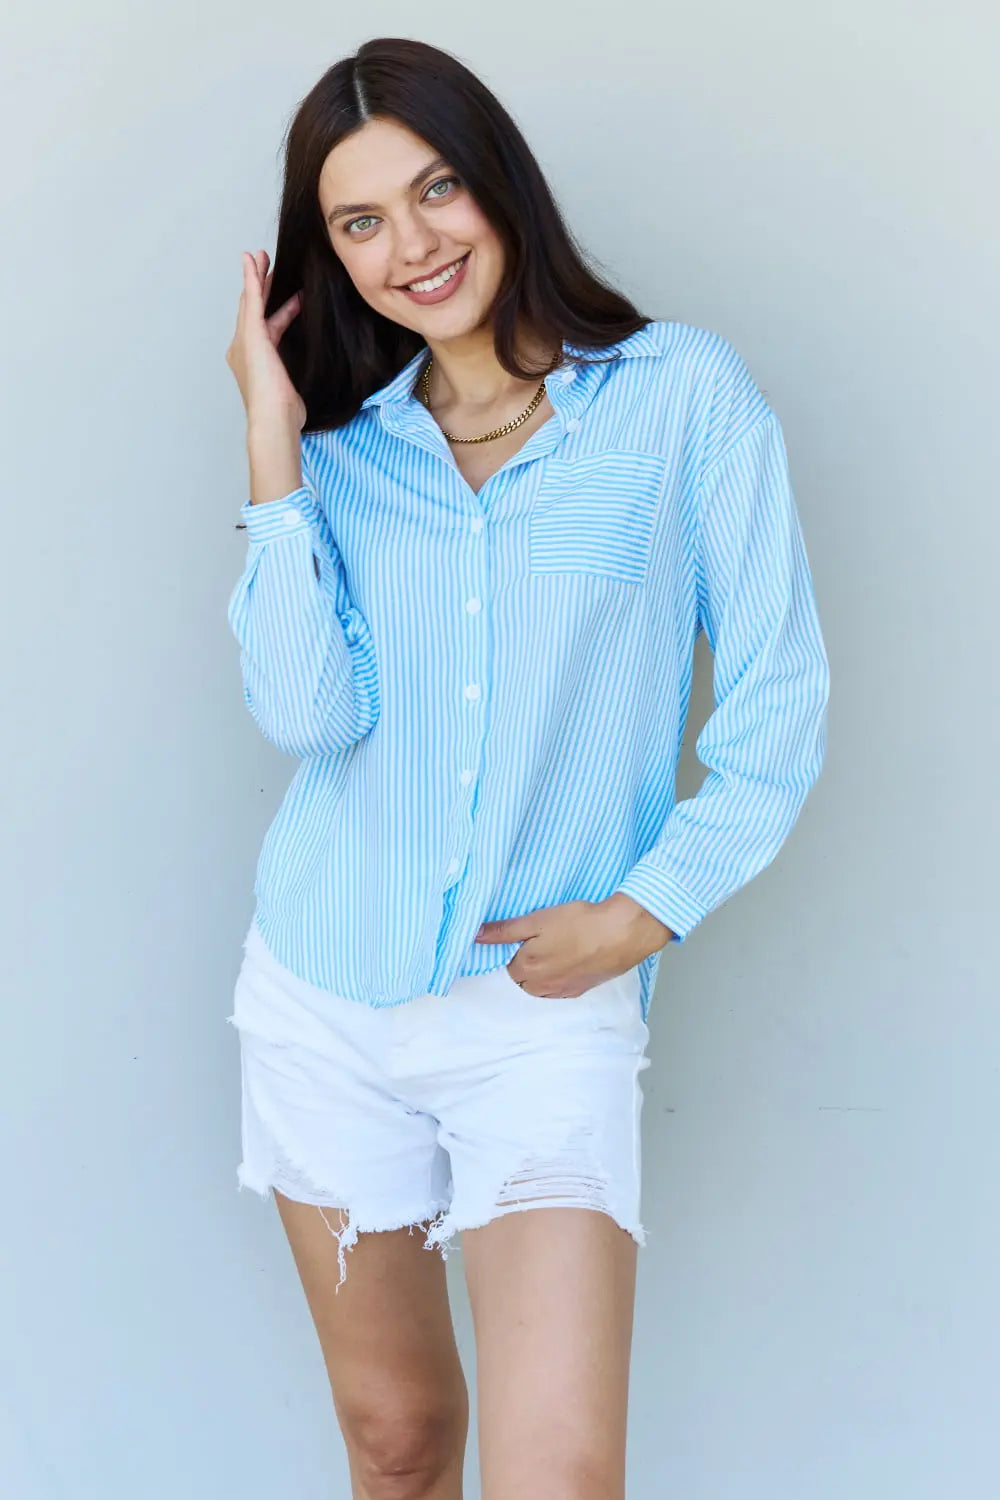 Doublju She Means Business Striped Button Down Shirt Top Ninexis